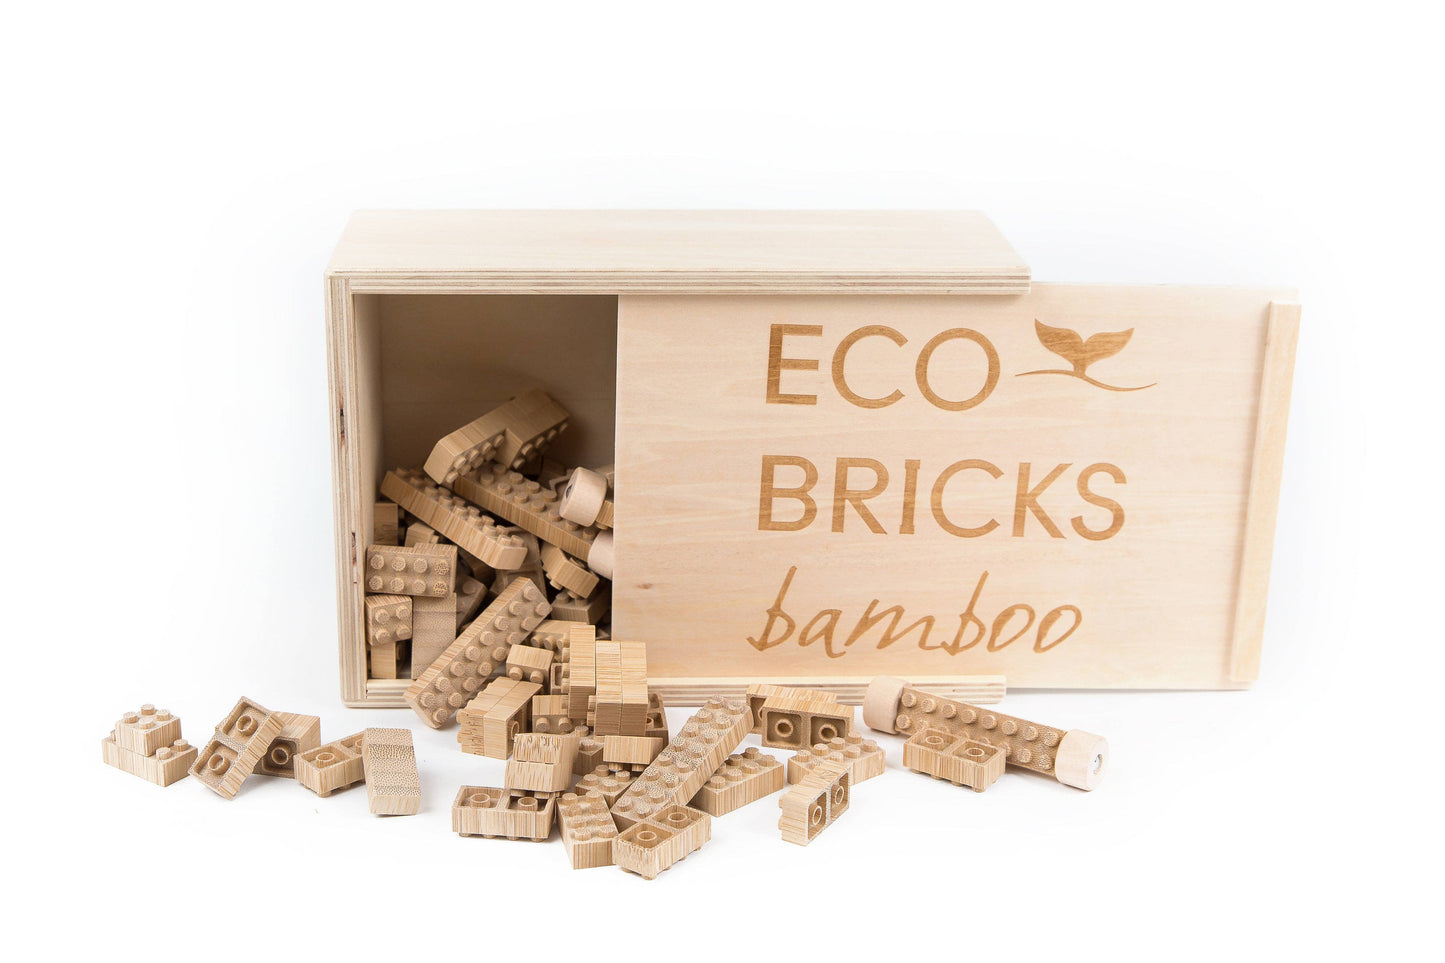 Eco-Bricks 250-piece box, opened with bricks spilling out of it